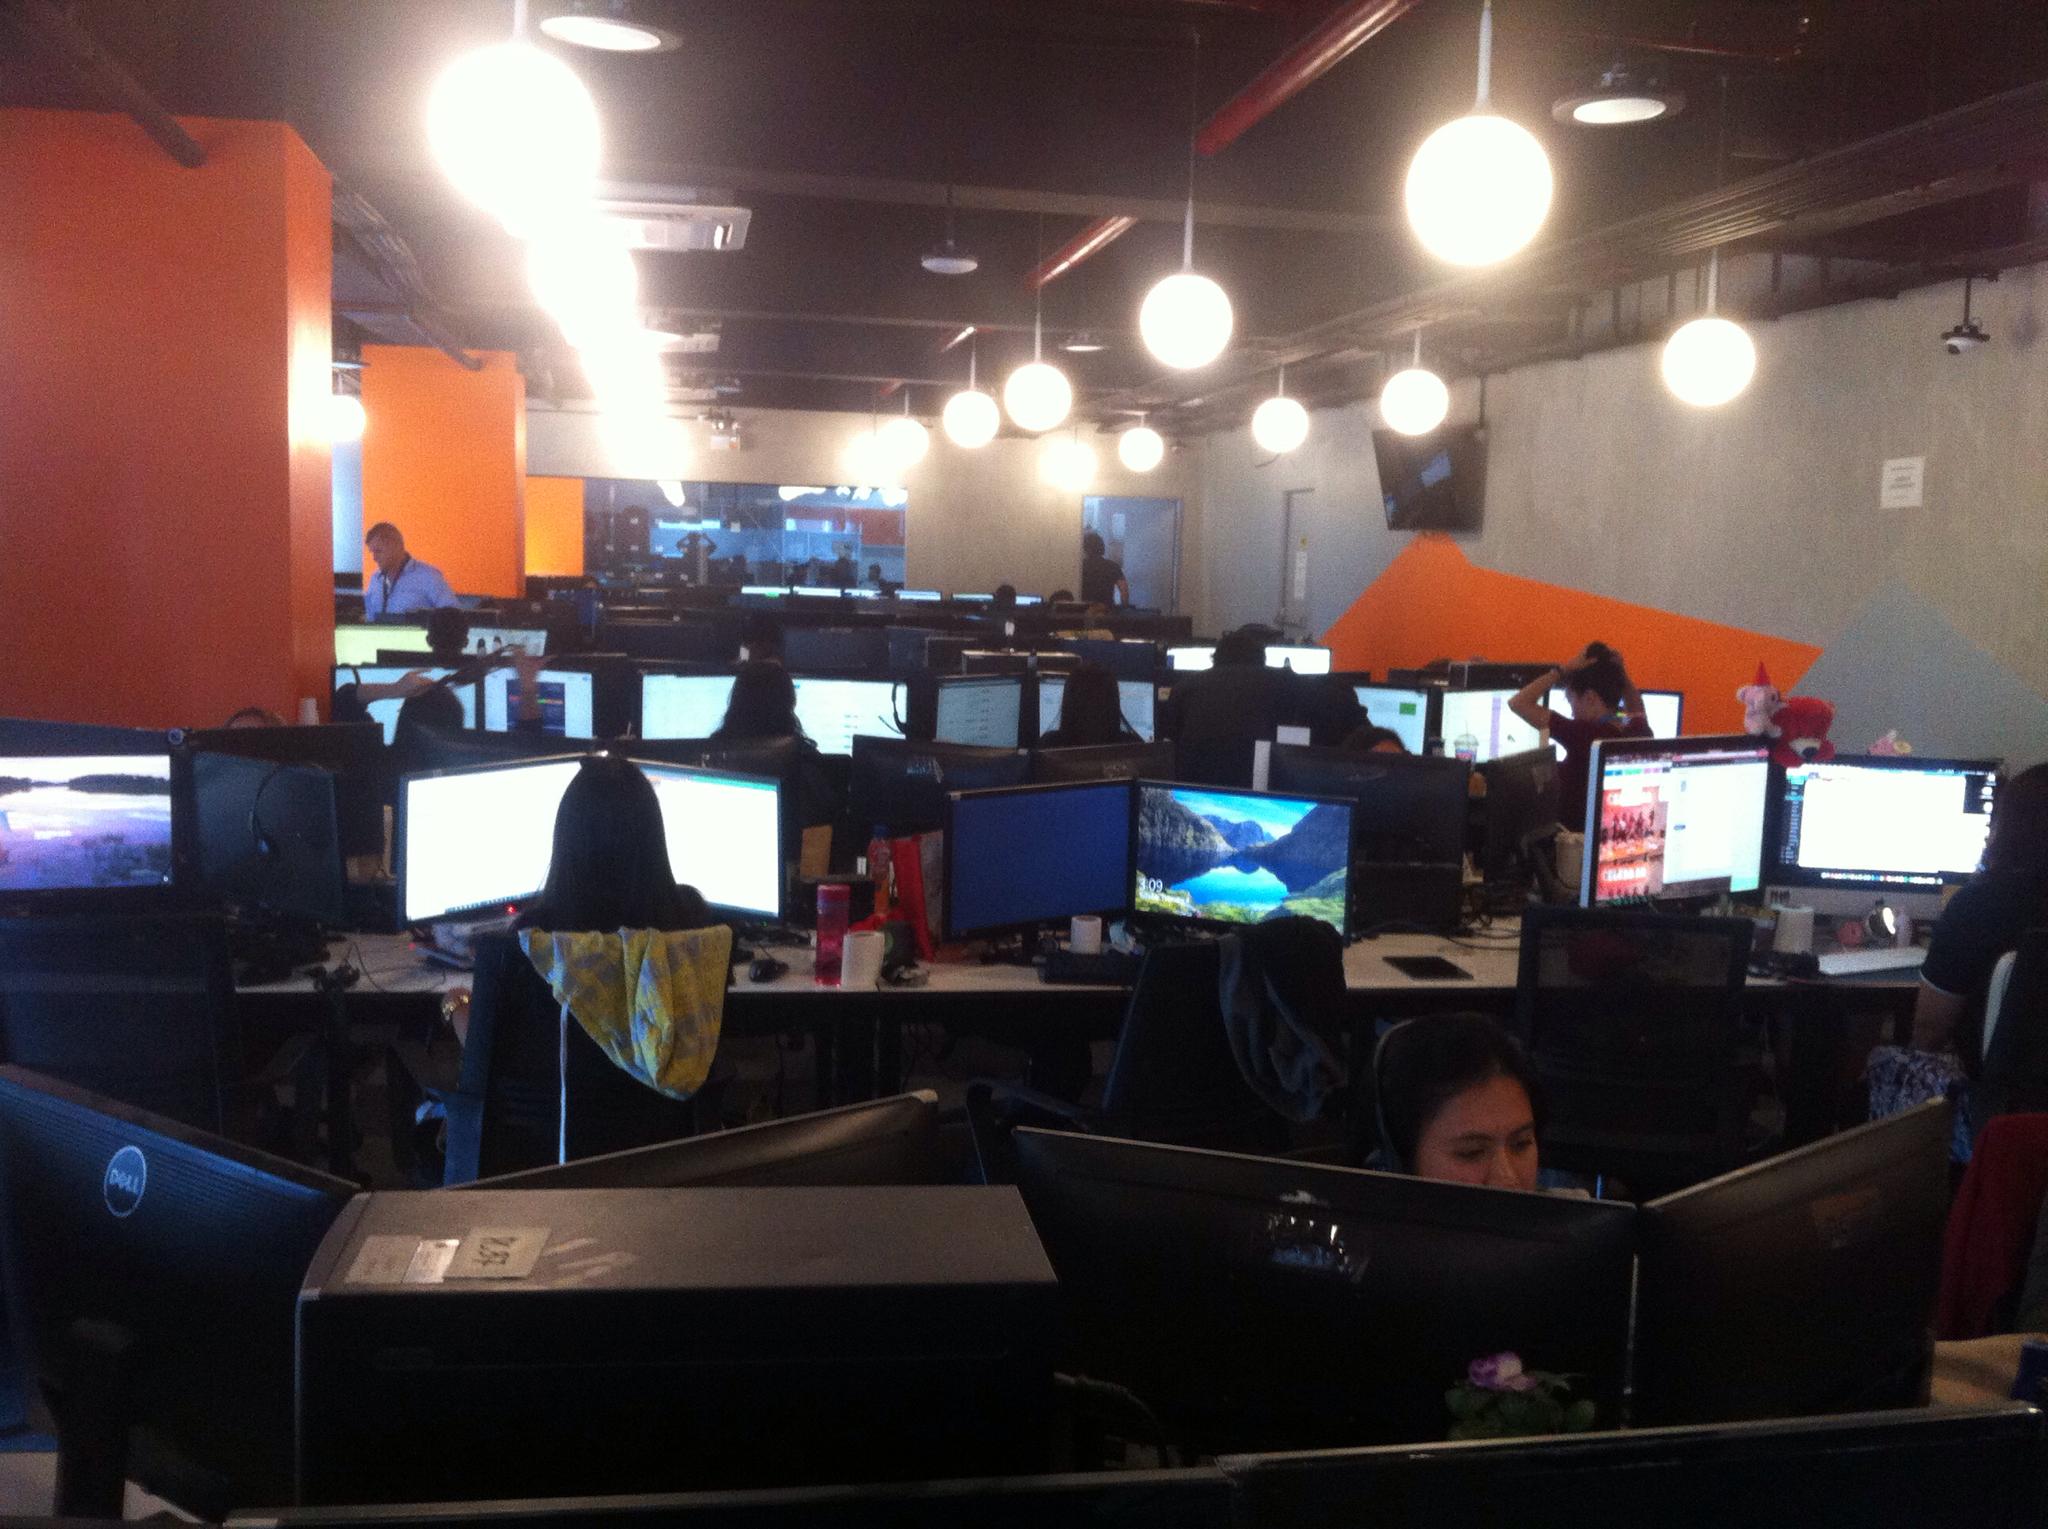 A Logistics outsourcing Office with Orange walls and Computer Monitors